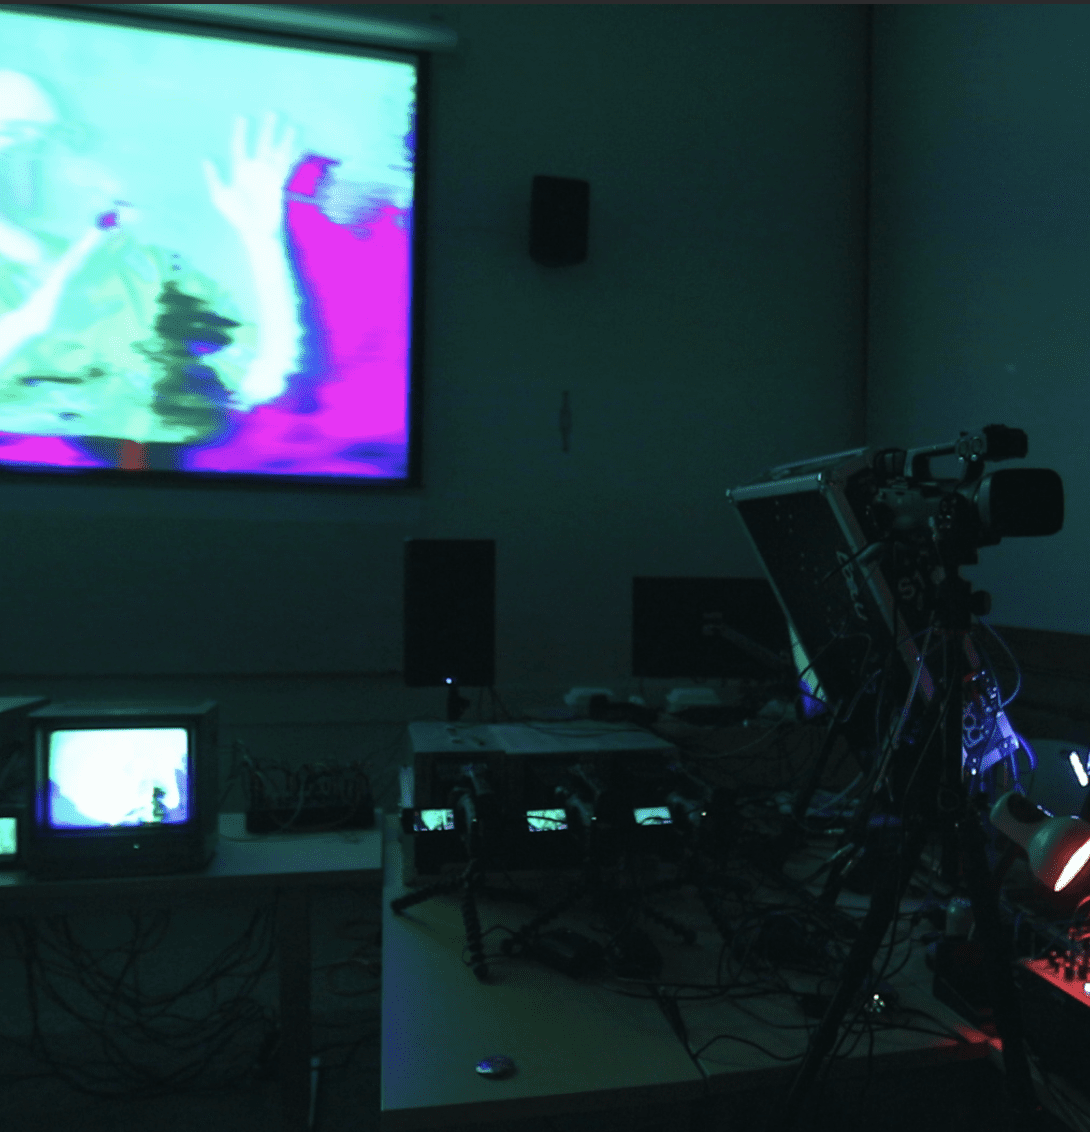 An abstracted video is displayed on a projector screen in the background. In the foreground is a camera and a tech setup filled with colorful wires.